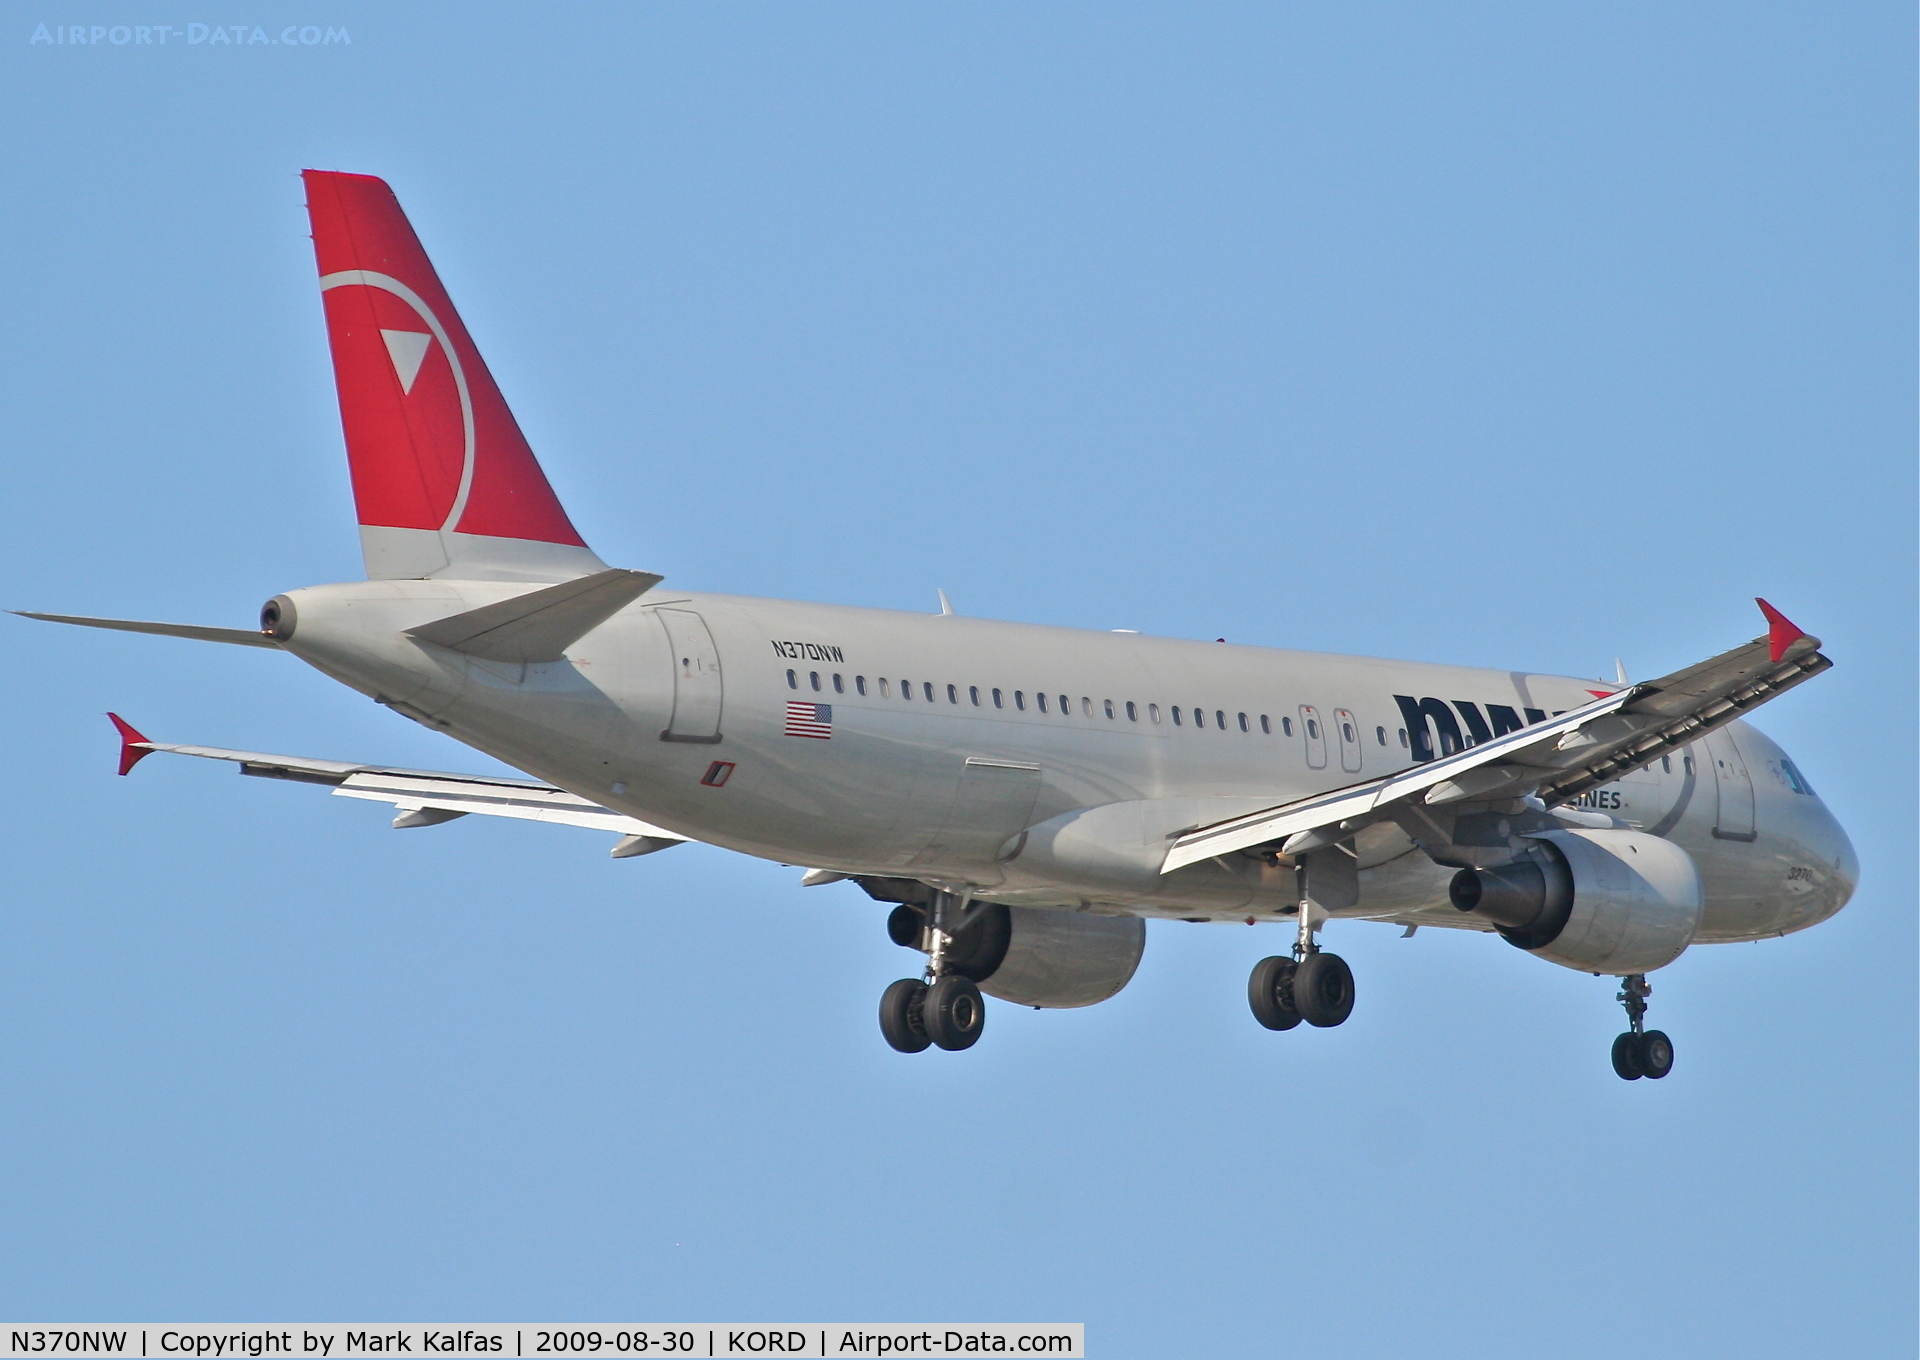 N370NW, 1999 Airbus A320-212 C/N 1037, Northwest Airlines A320-212, N370NW RWY 10 approach KORD